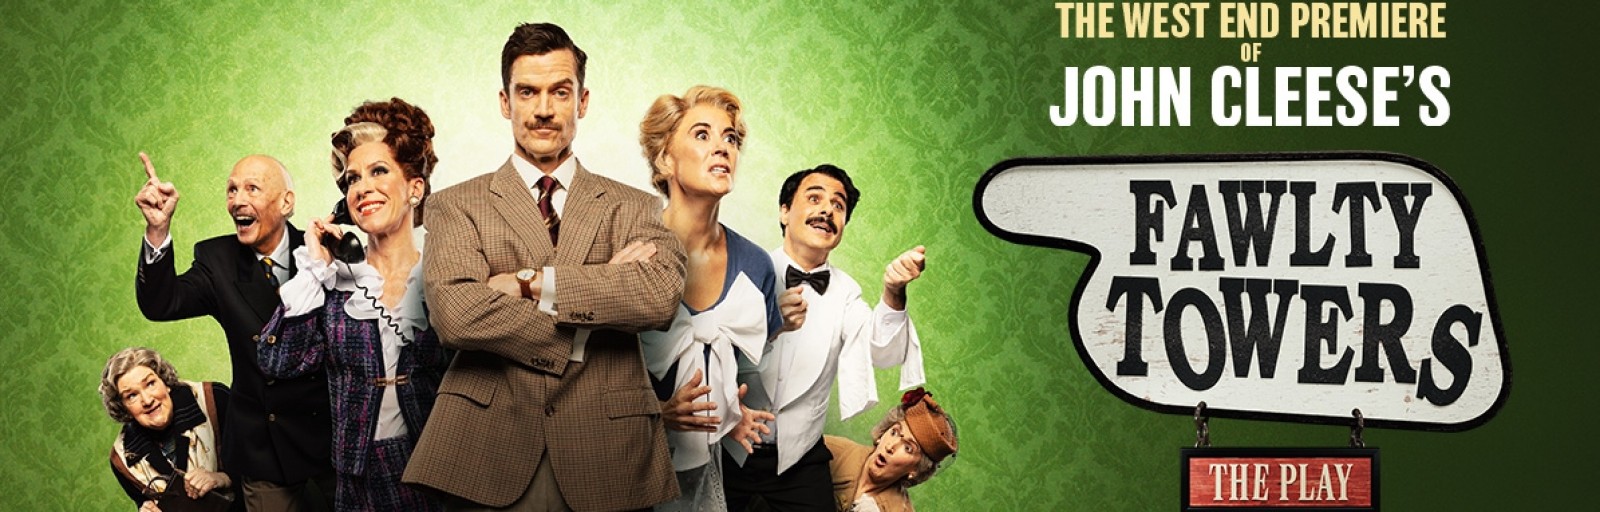 John Cleese’s Fawlty Towers - The Play